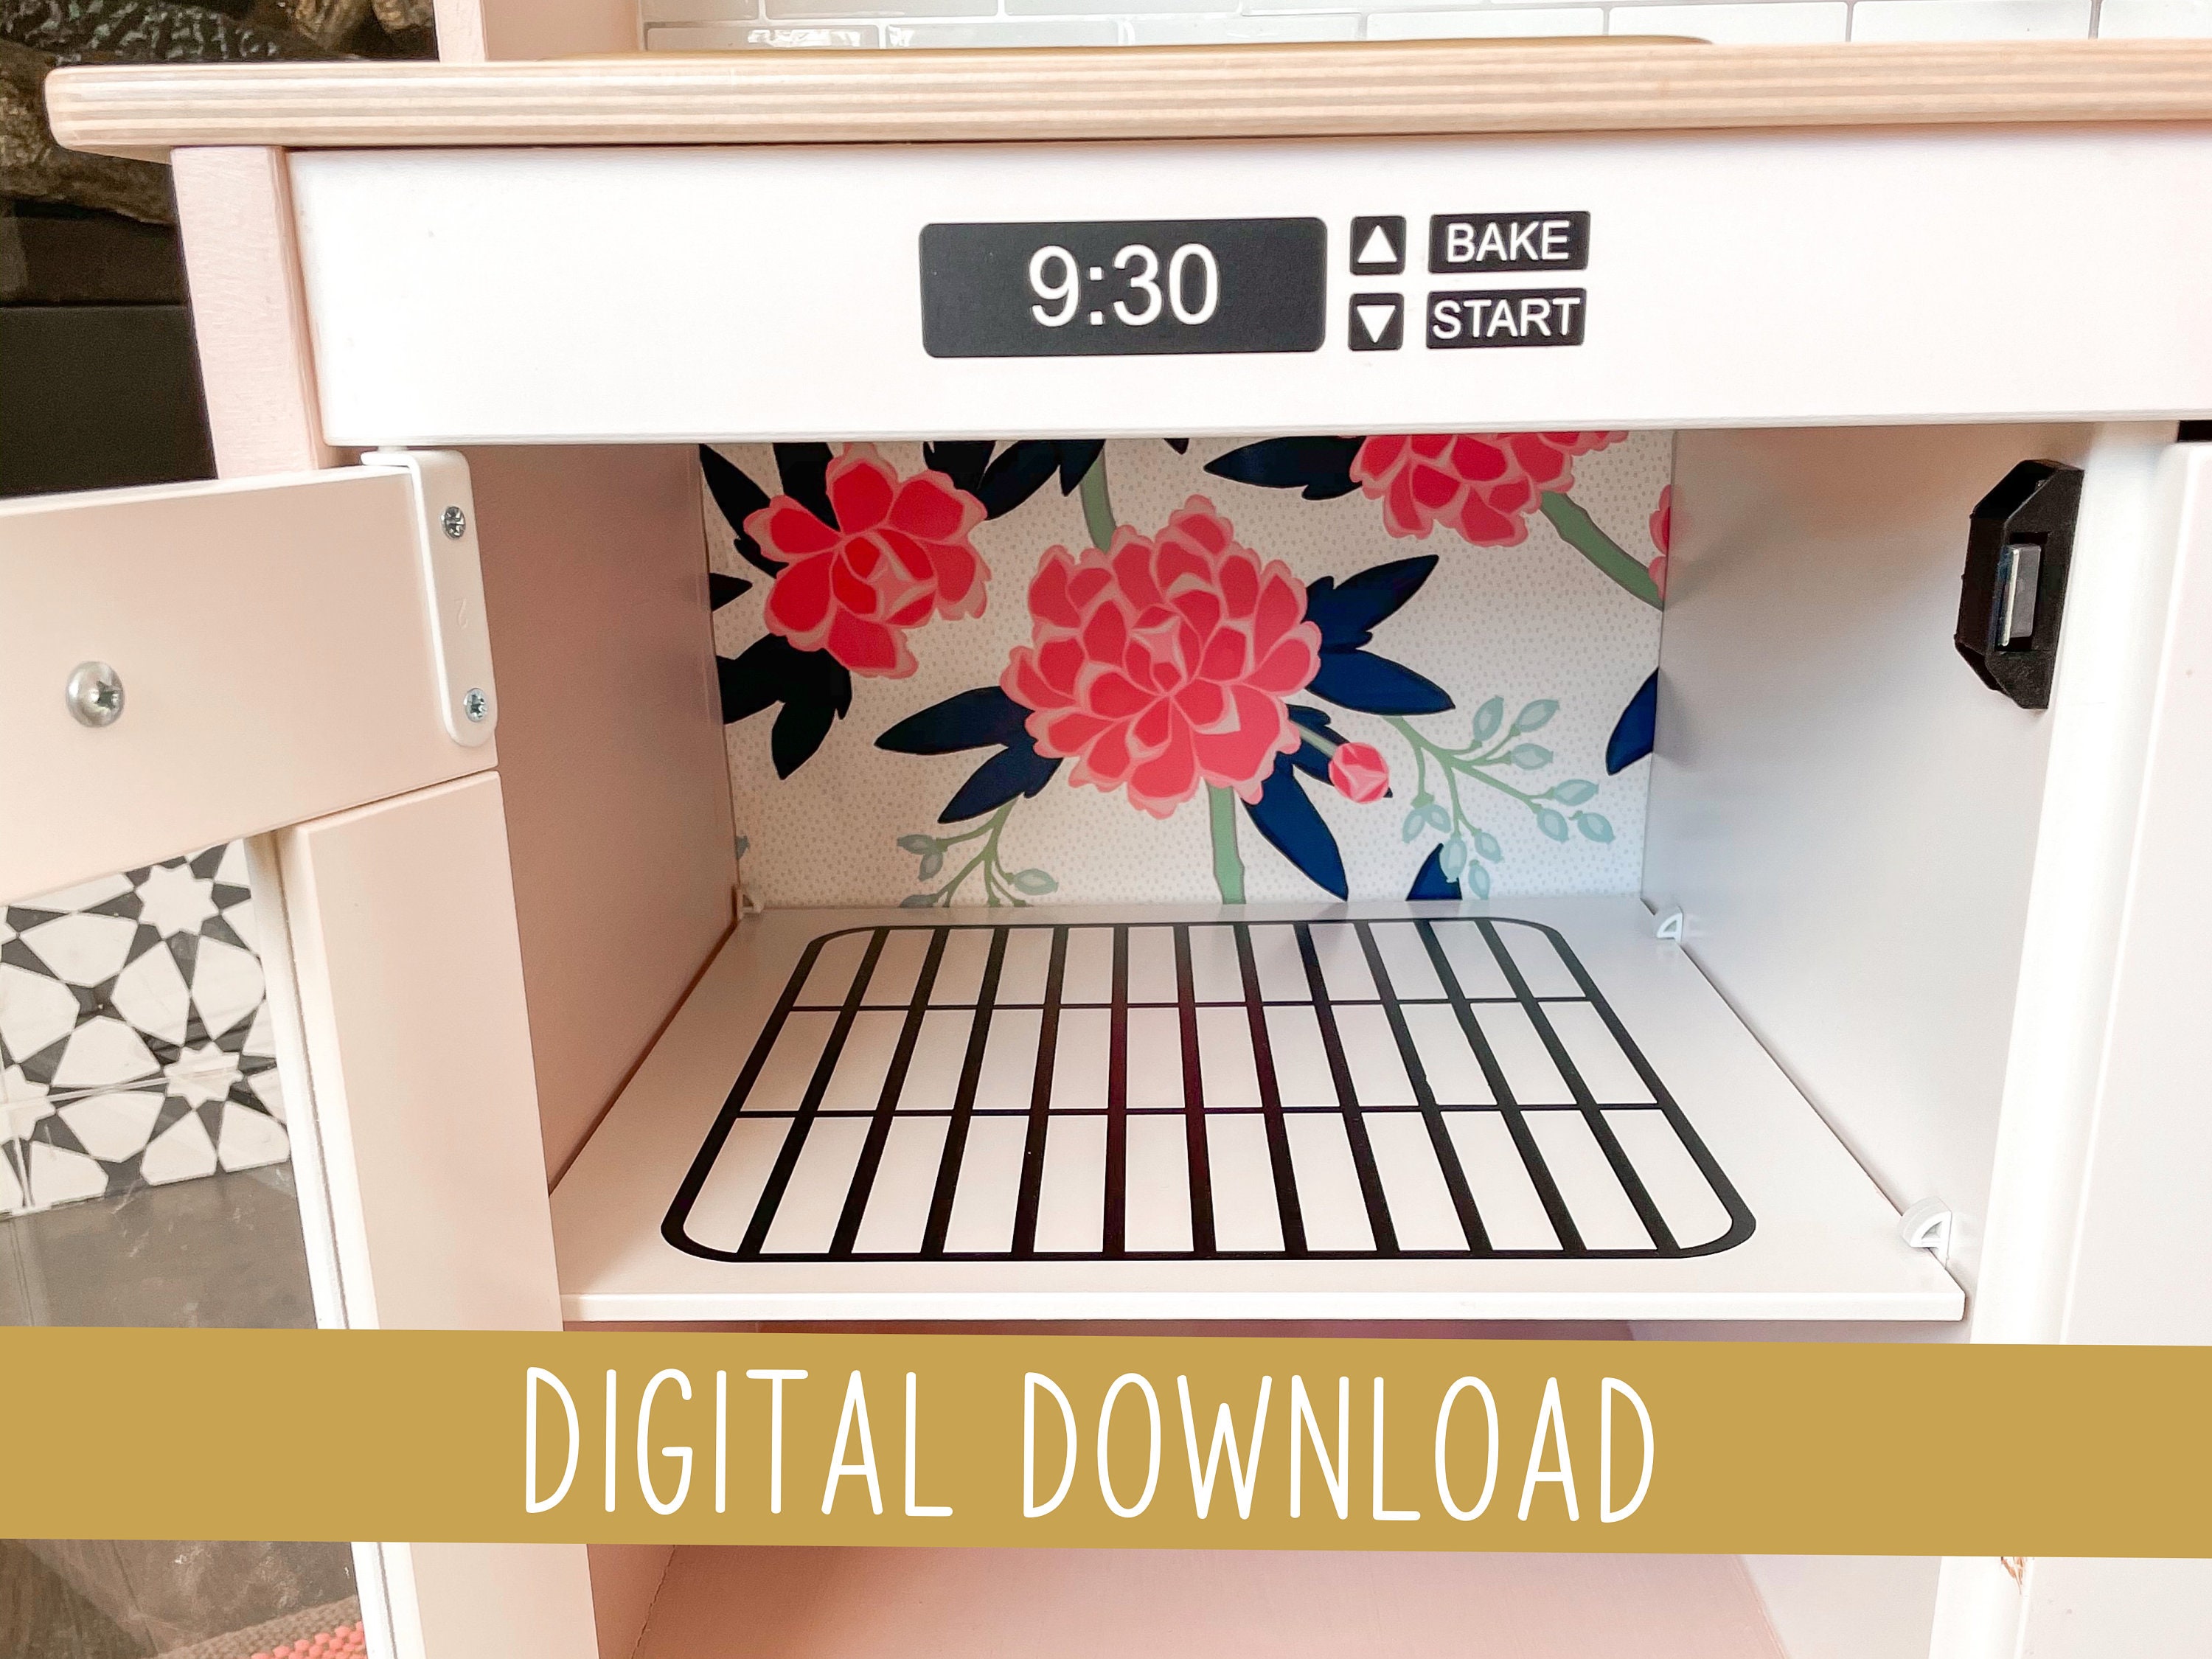 SVG Dollhouse Small Kitchen Microwave / Dollhouse DIY Mini Microwave Oven  Cricut Cut File Instant Download -  Denmark